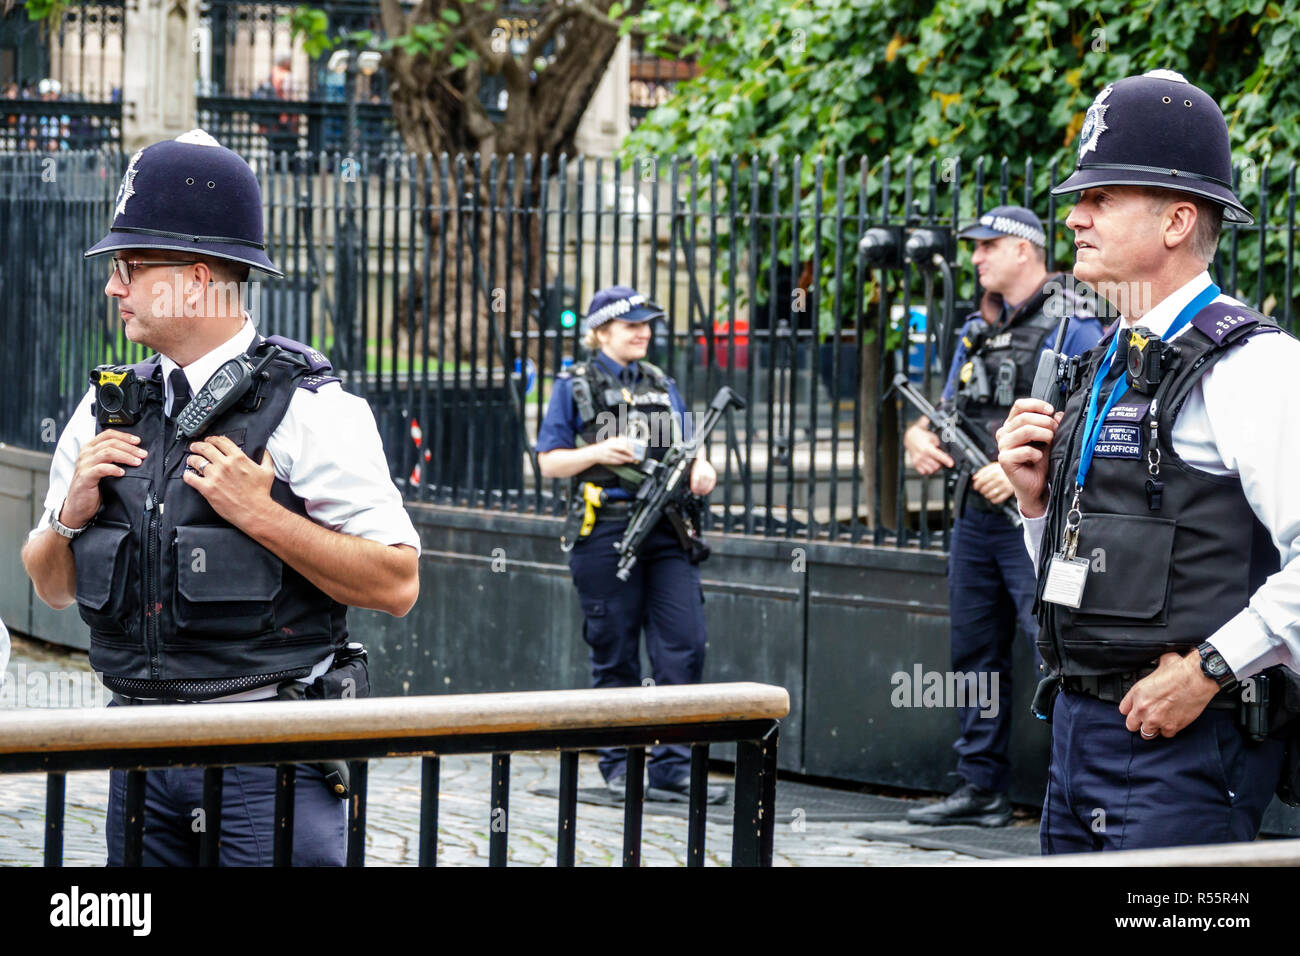 United Kingdom England London,Palace of Westminster Parliament,security police officers armed guards body camera,bullet proof vest uniform bobby helme Stock Photo